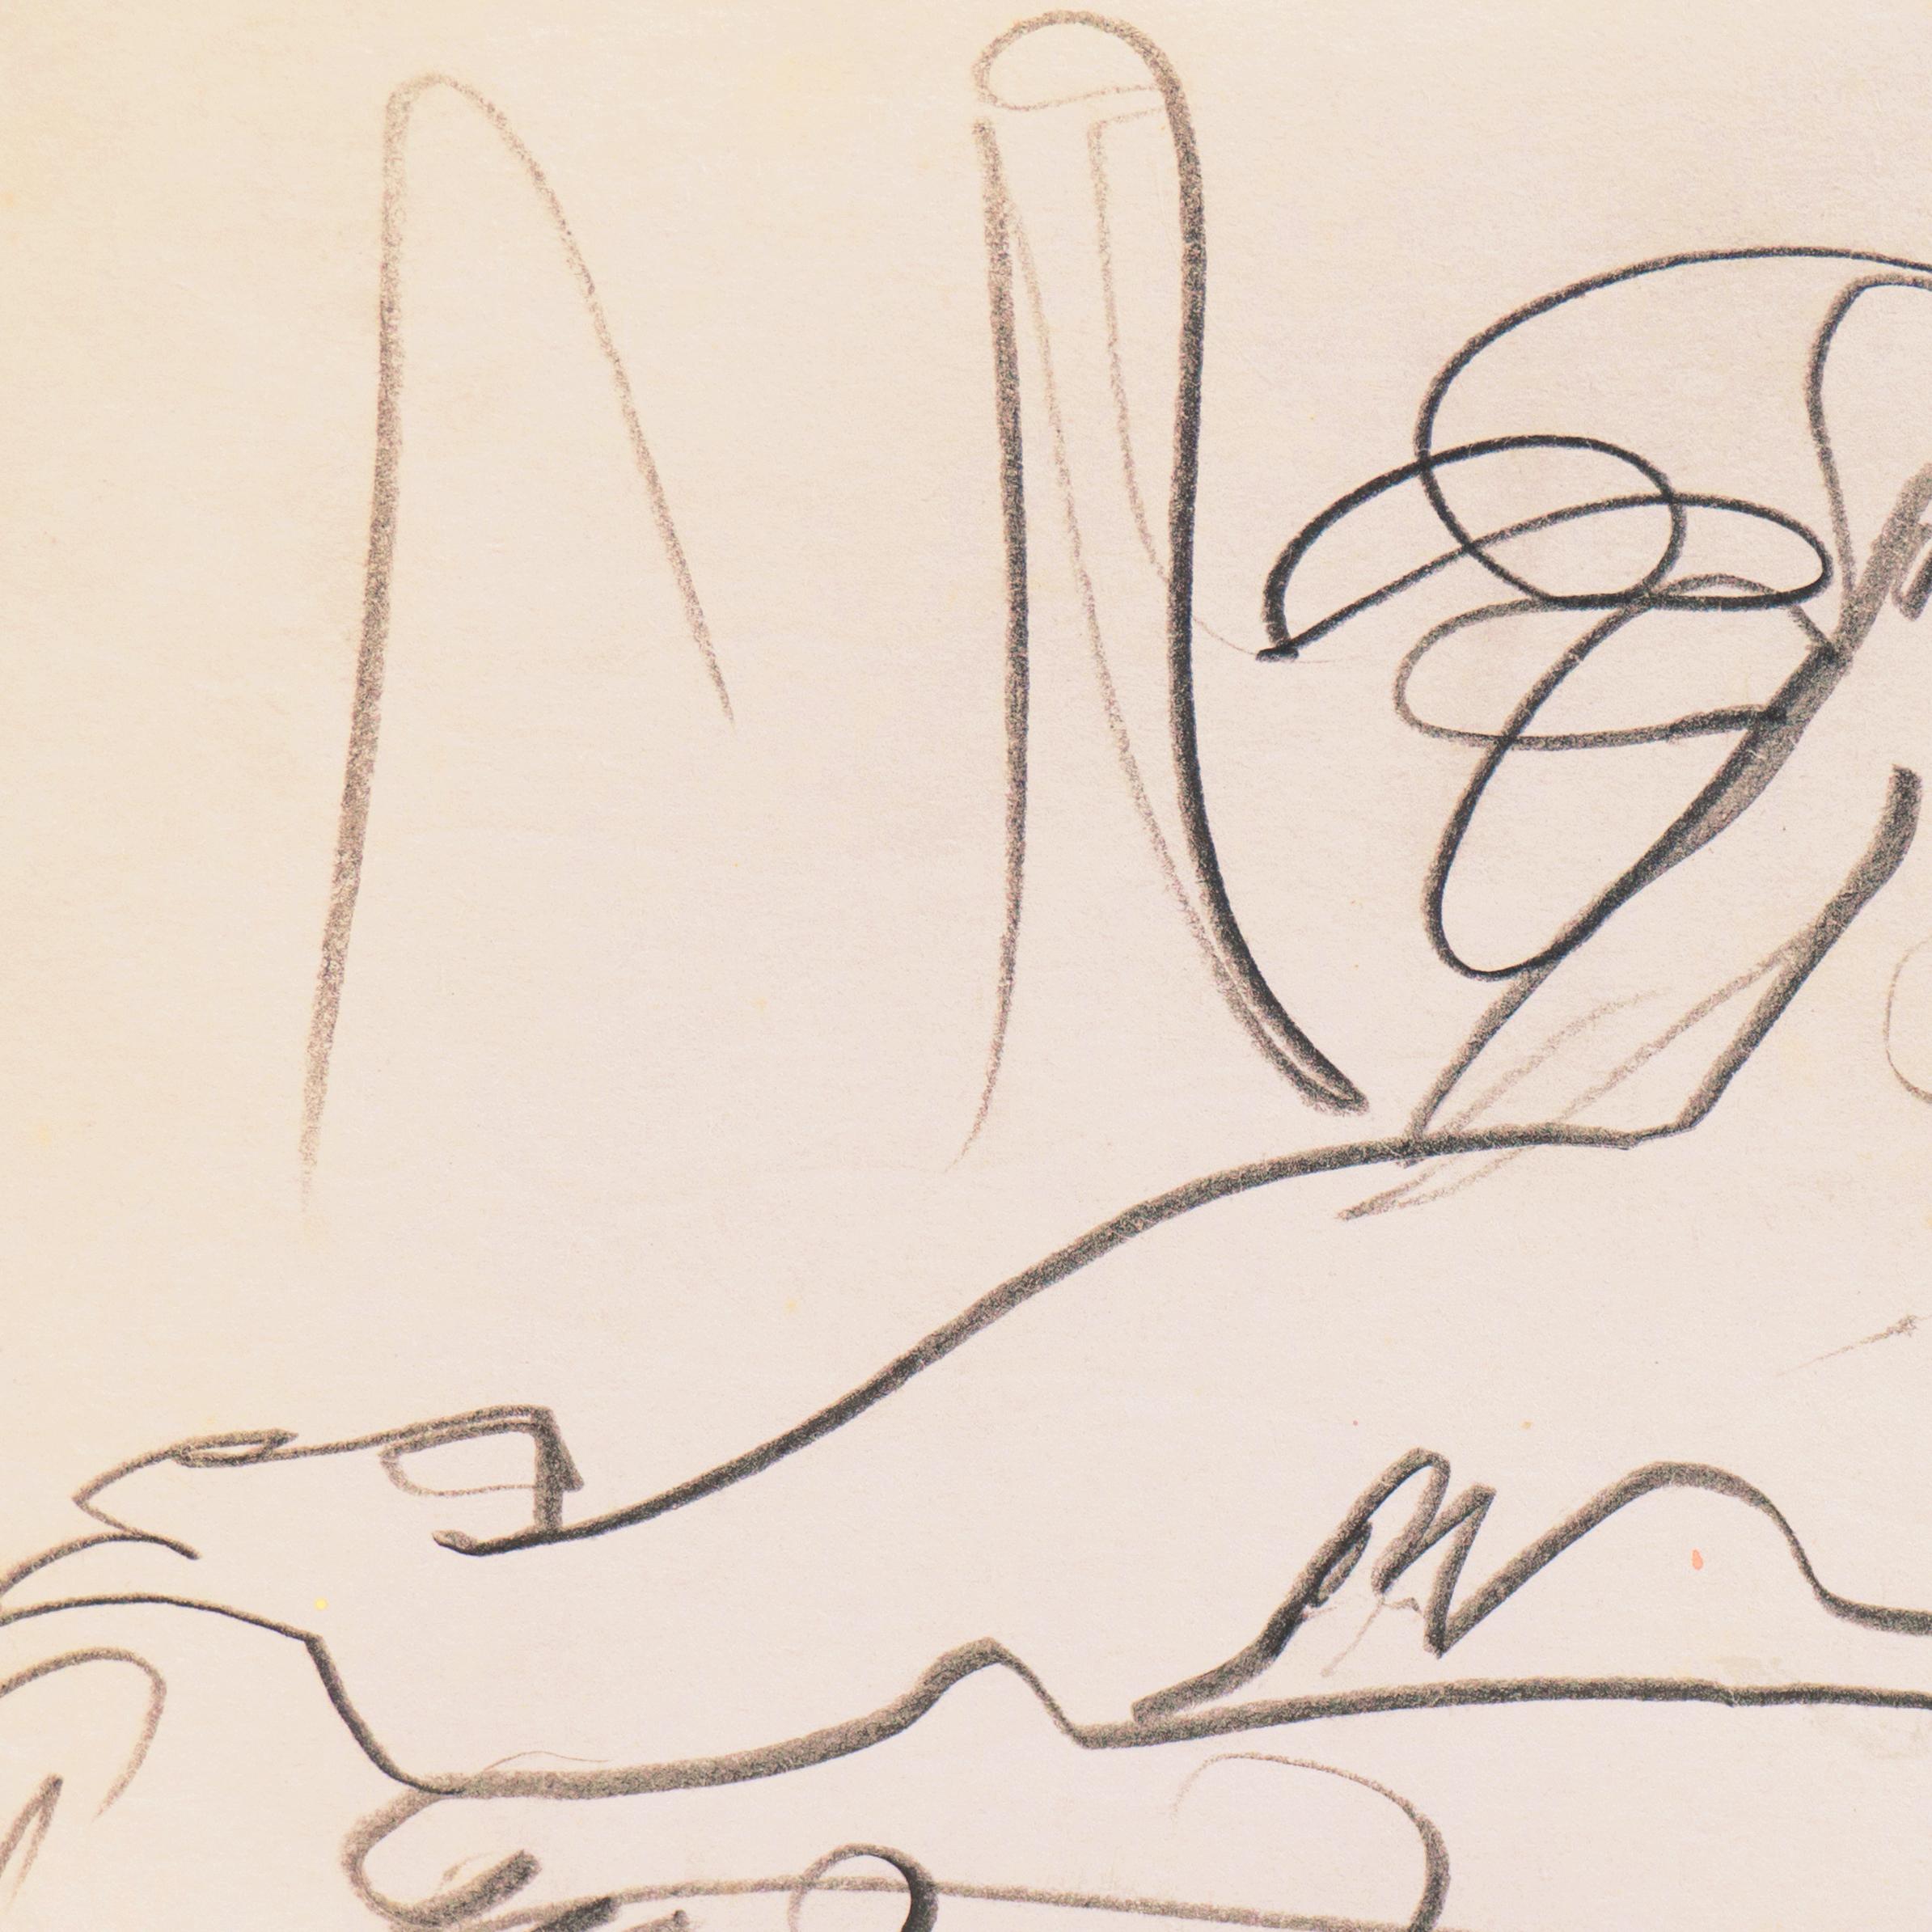 Di Gesu Estate Stamp verso for Victor di Gesu (American, 1914-1988) and created circa 1955.

An elegant, freehand sketch of a young woman with a bob cut, shown naked and reclining on a blanket with her head thrown back. 

Winner of the Prix Othon